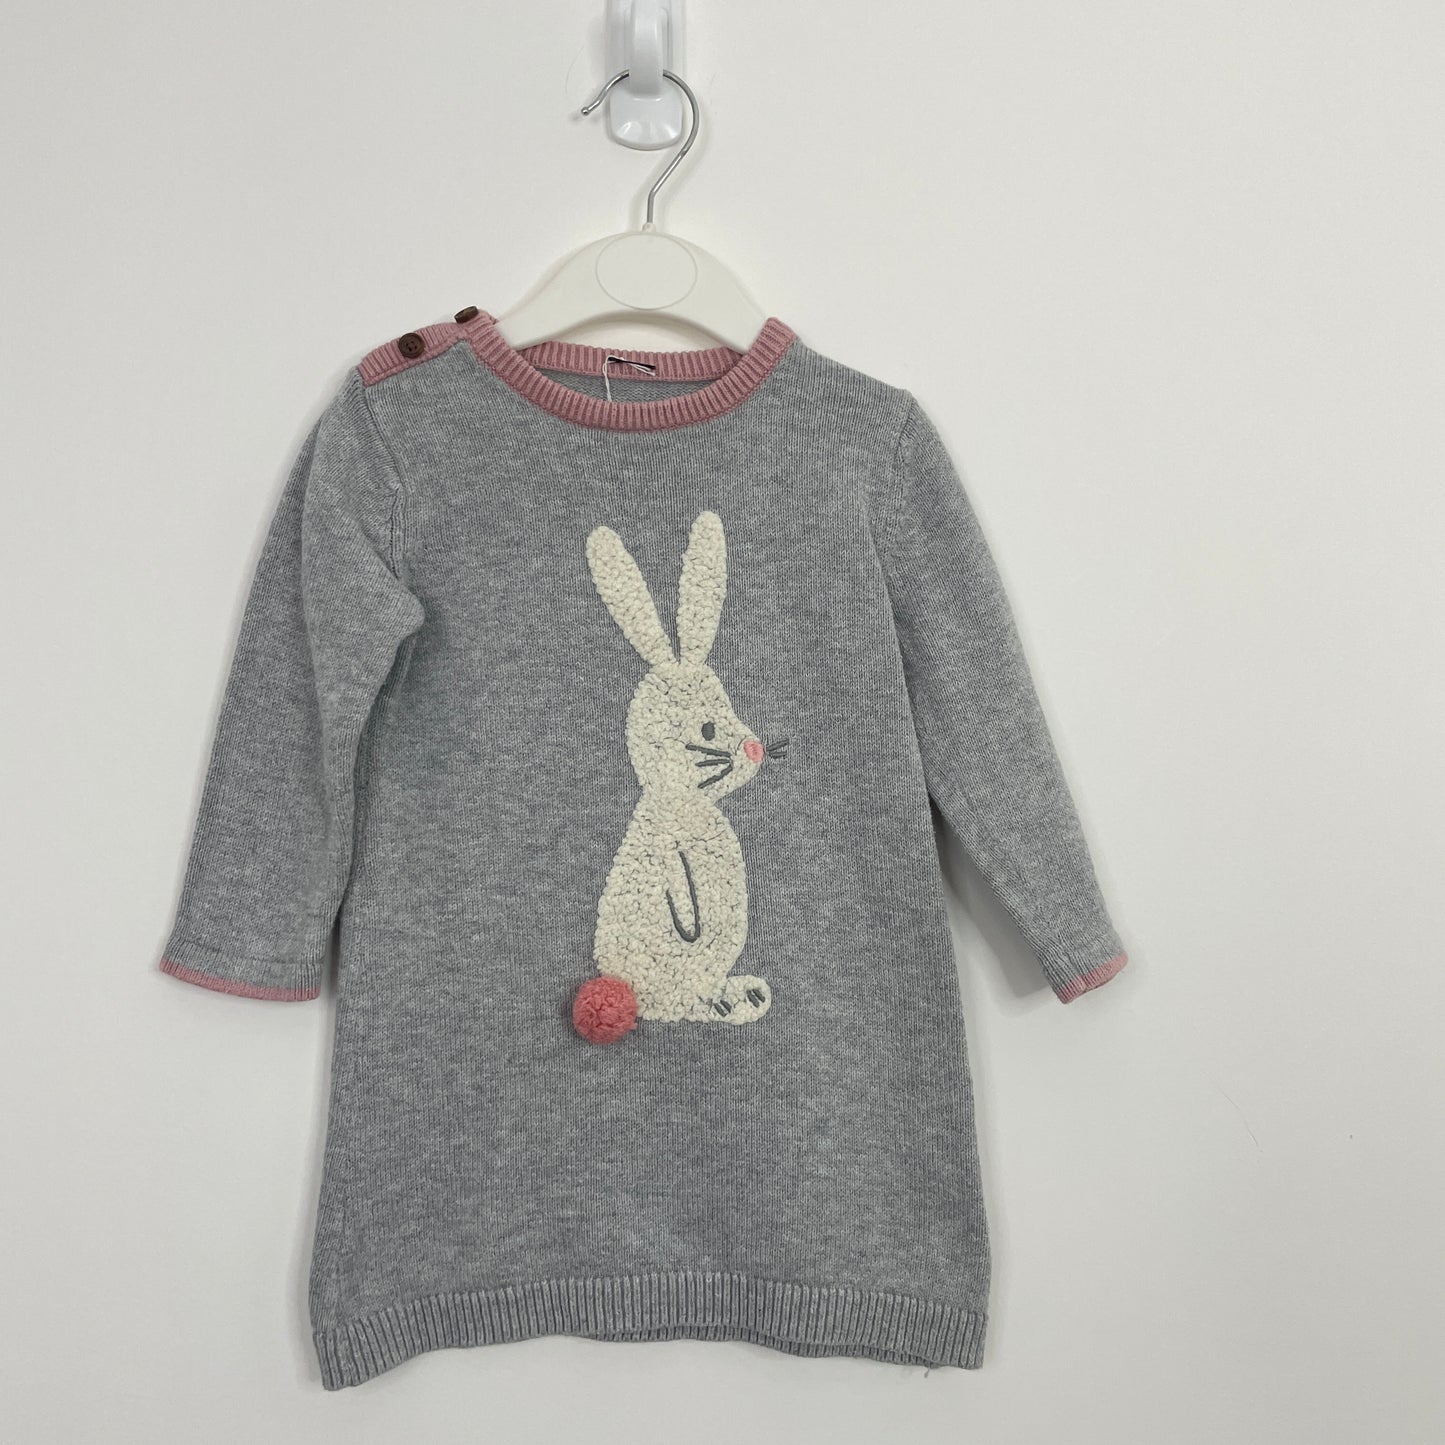 M&S Grey Knitted Dress with Bunny 6-9m